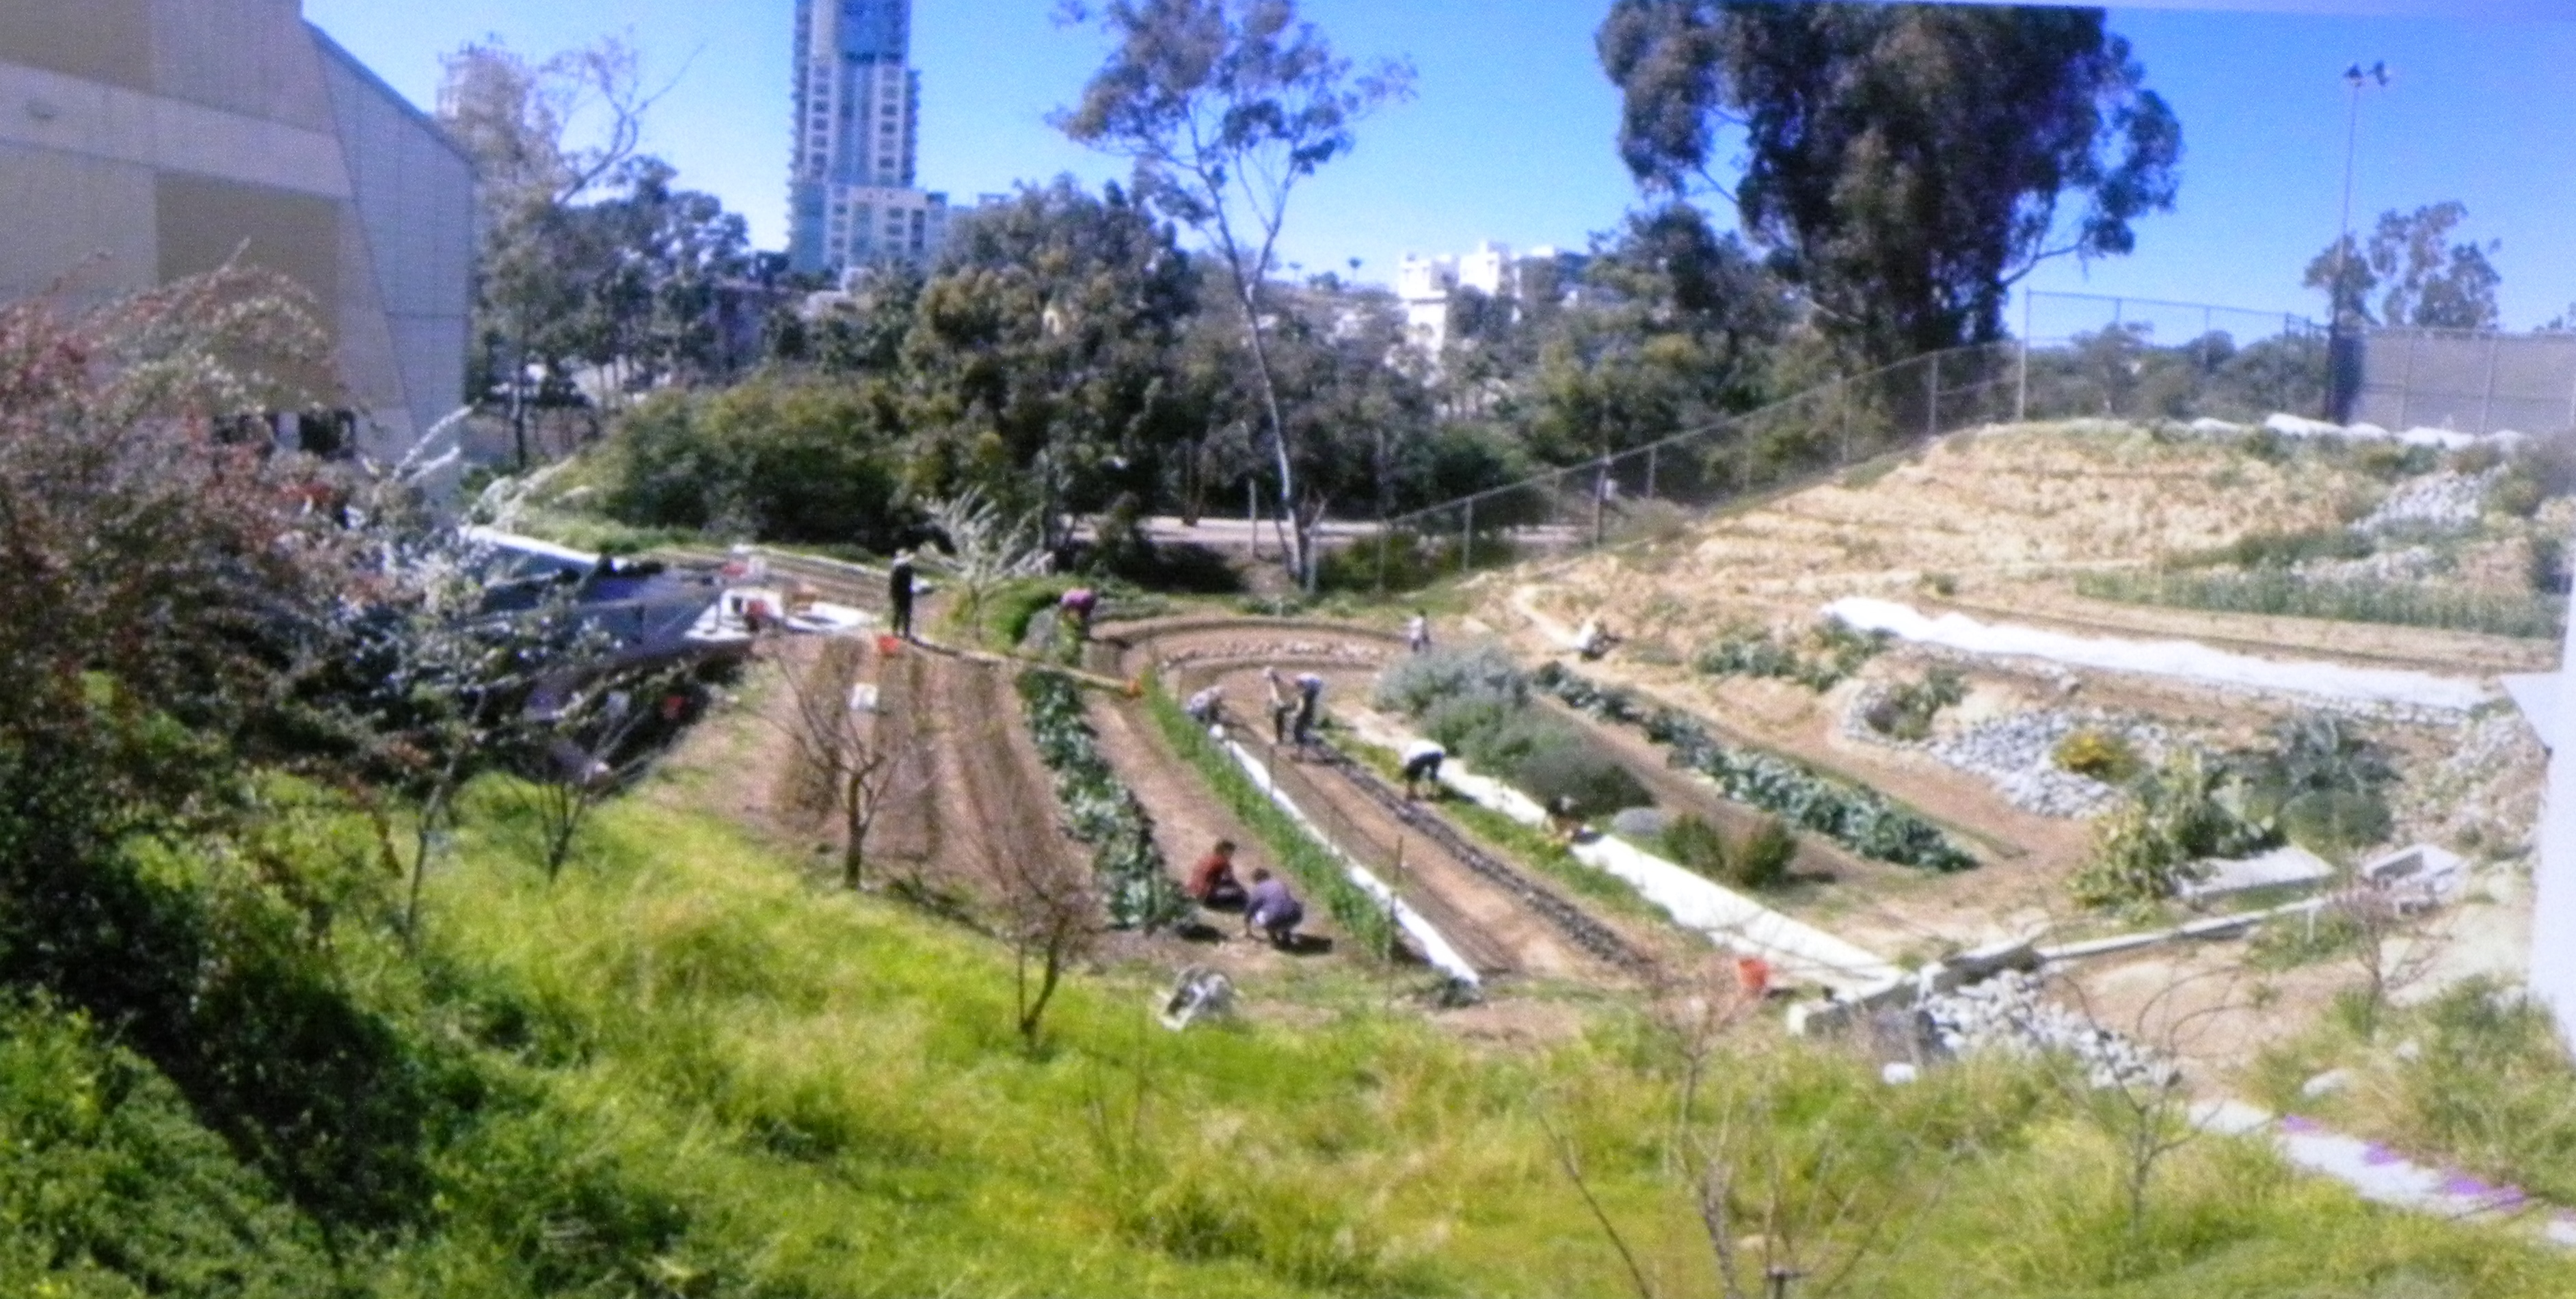 Water Conservation with Ollas - Sustainable Food Center